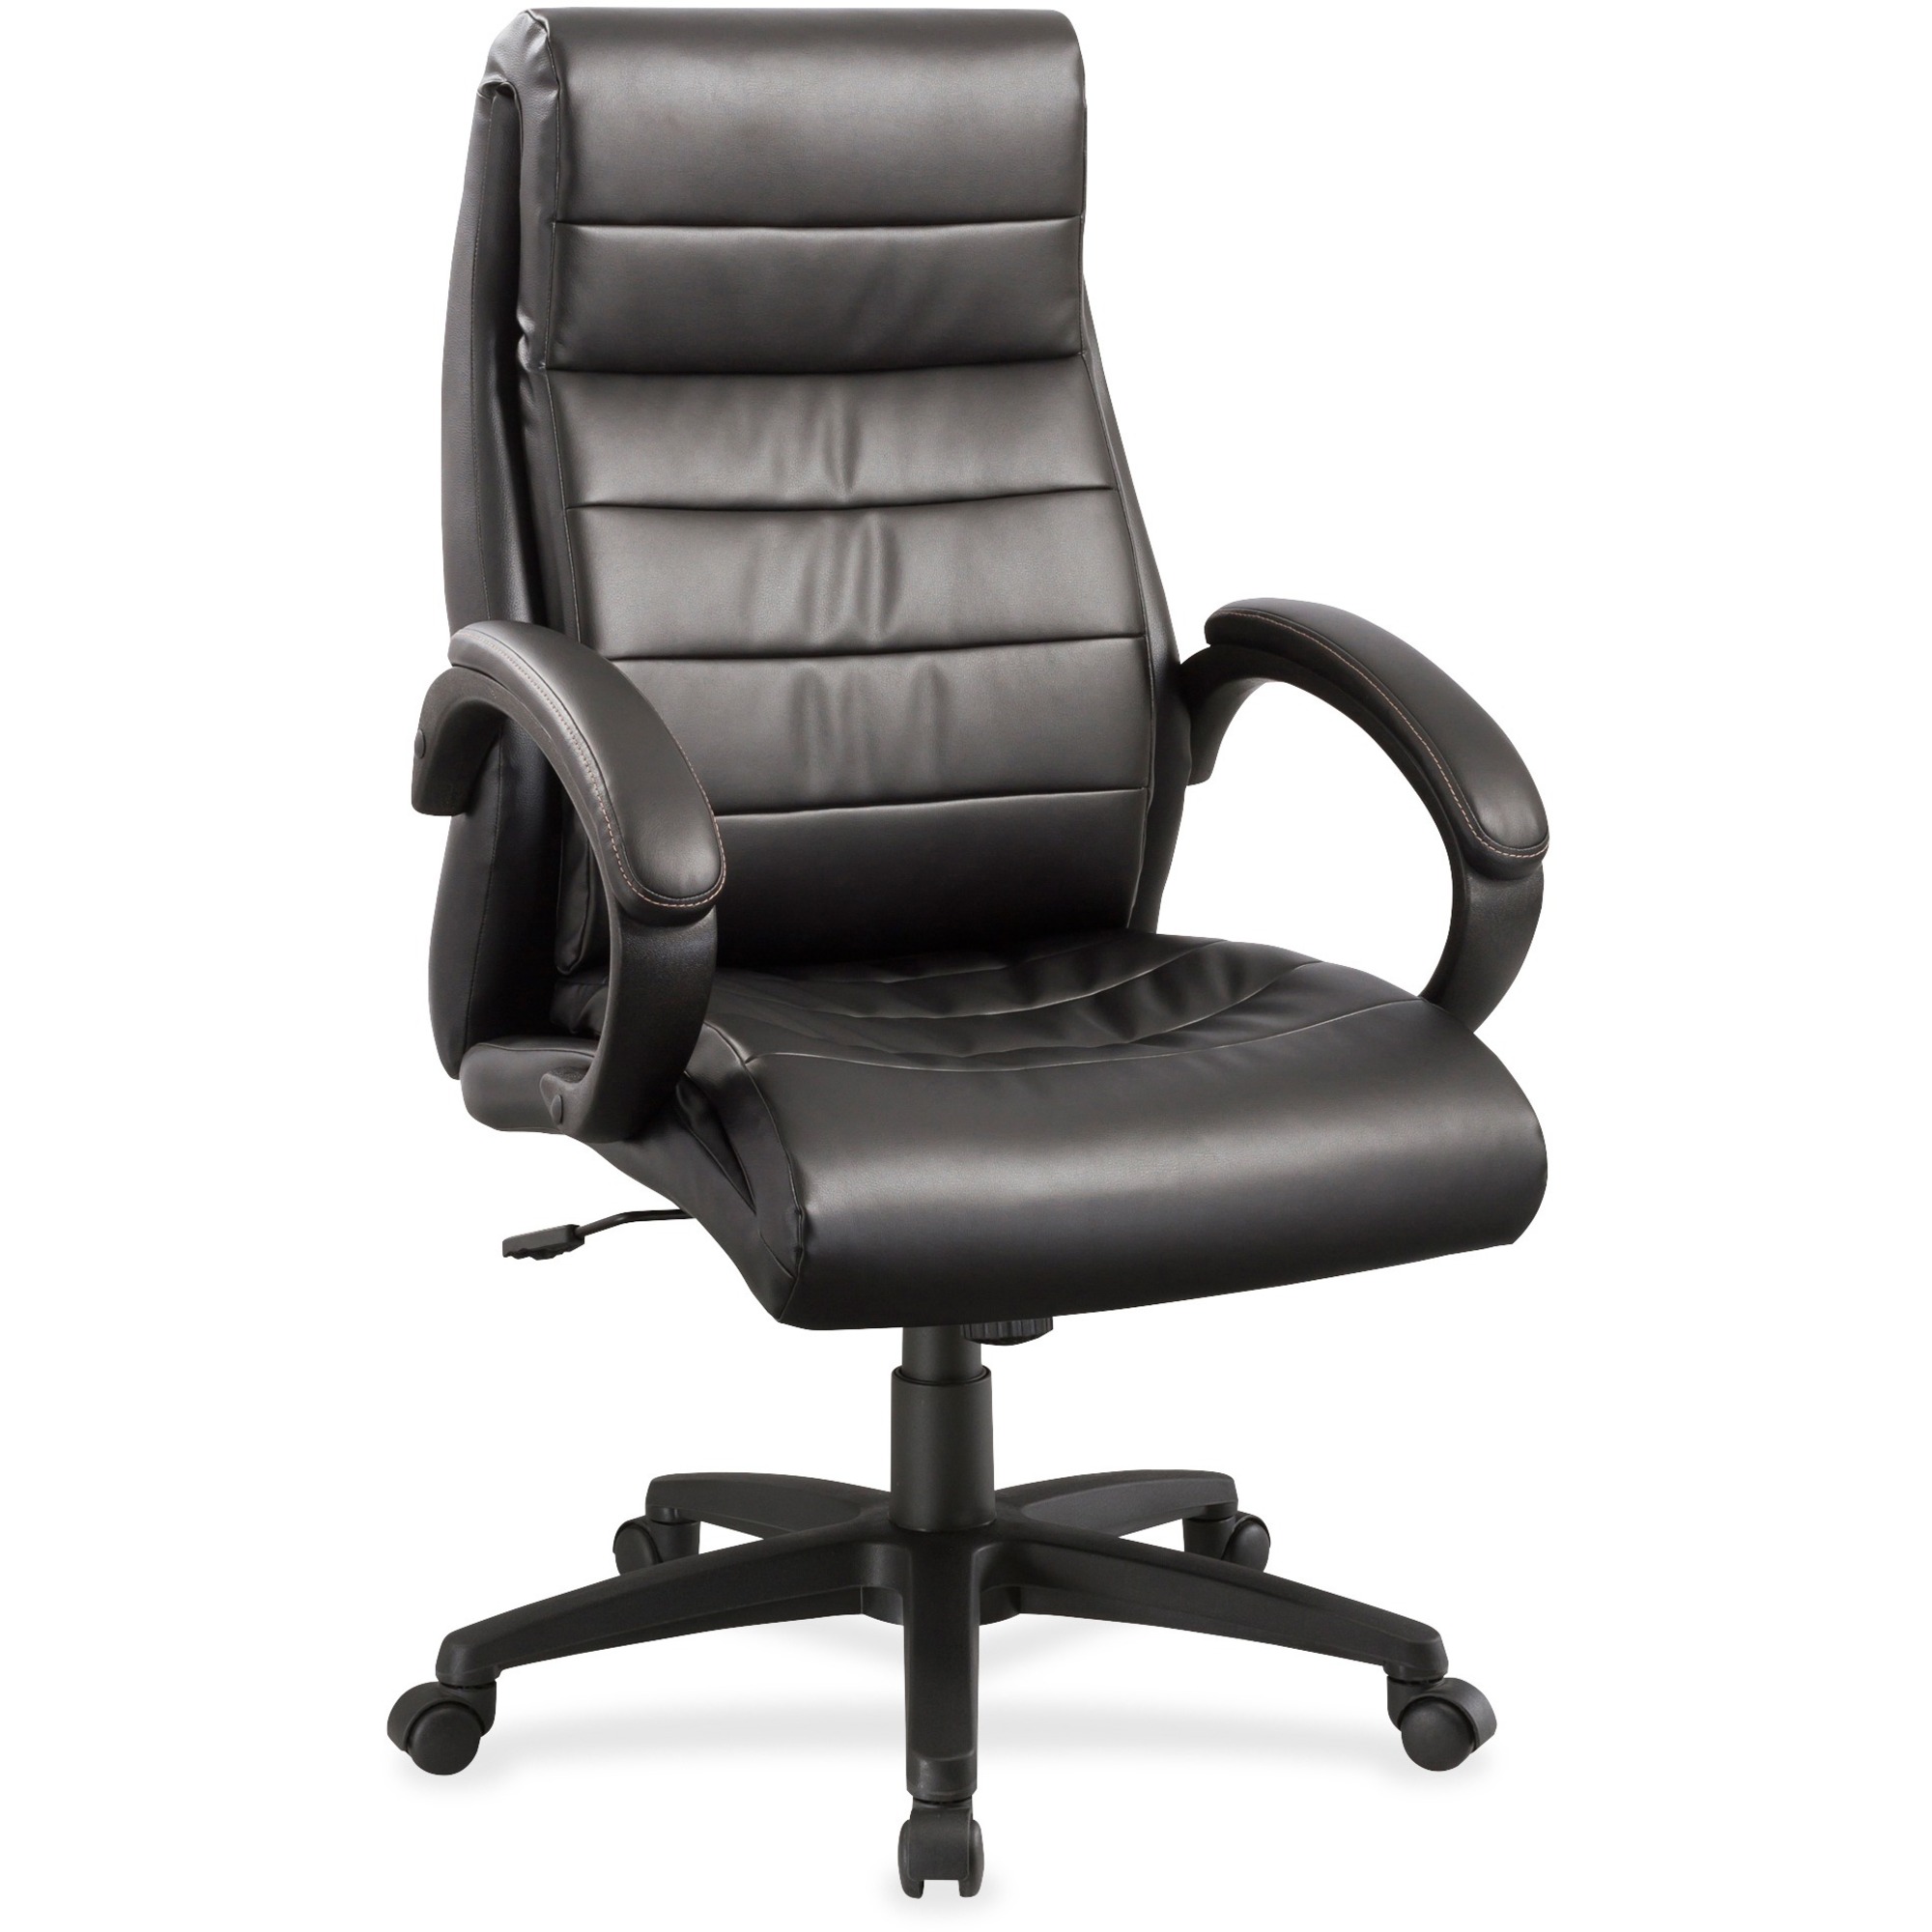 Lorell Deluxe High-back Leather Chair - Leather Seat - Leather Back - 5-star Base - Black - 27.8 Width X 32 Depth X 44.5 Height